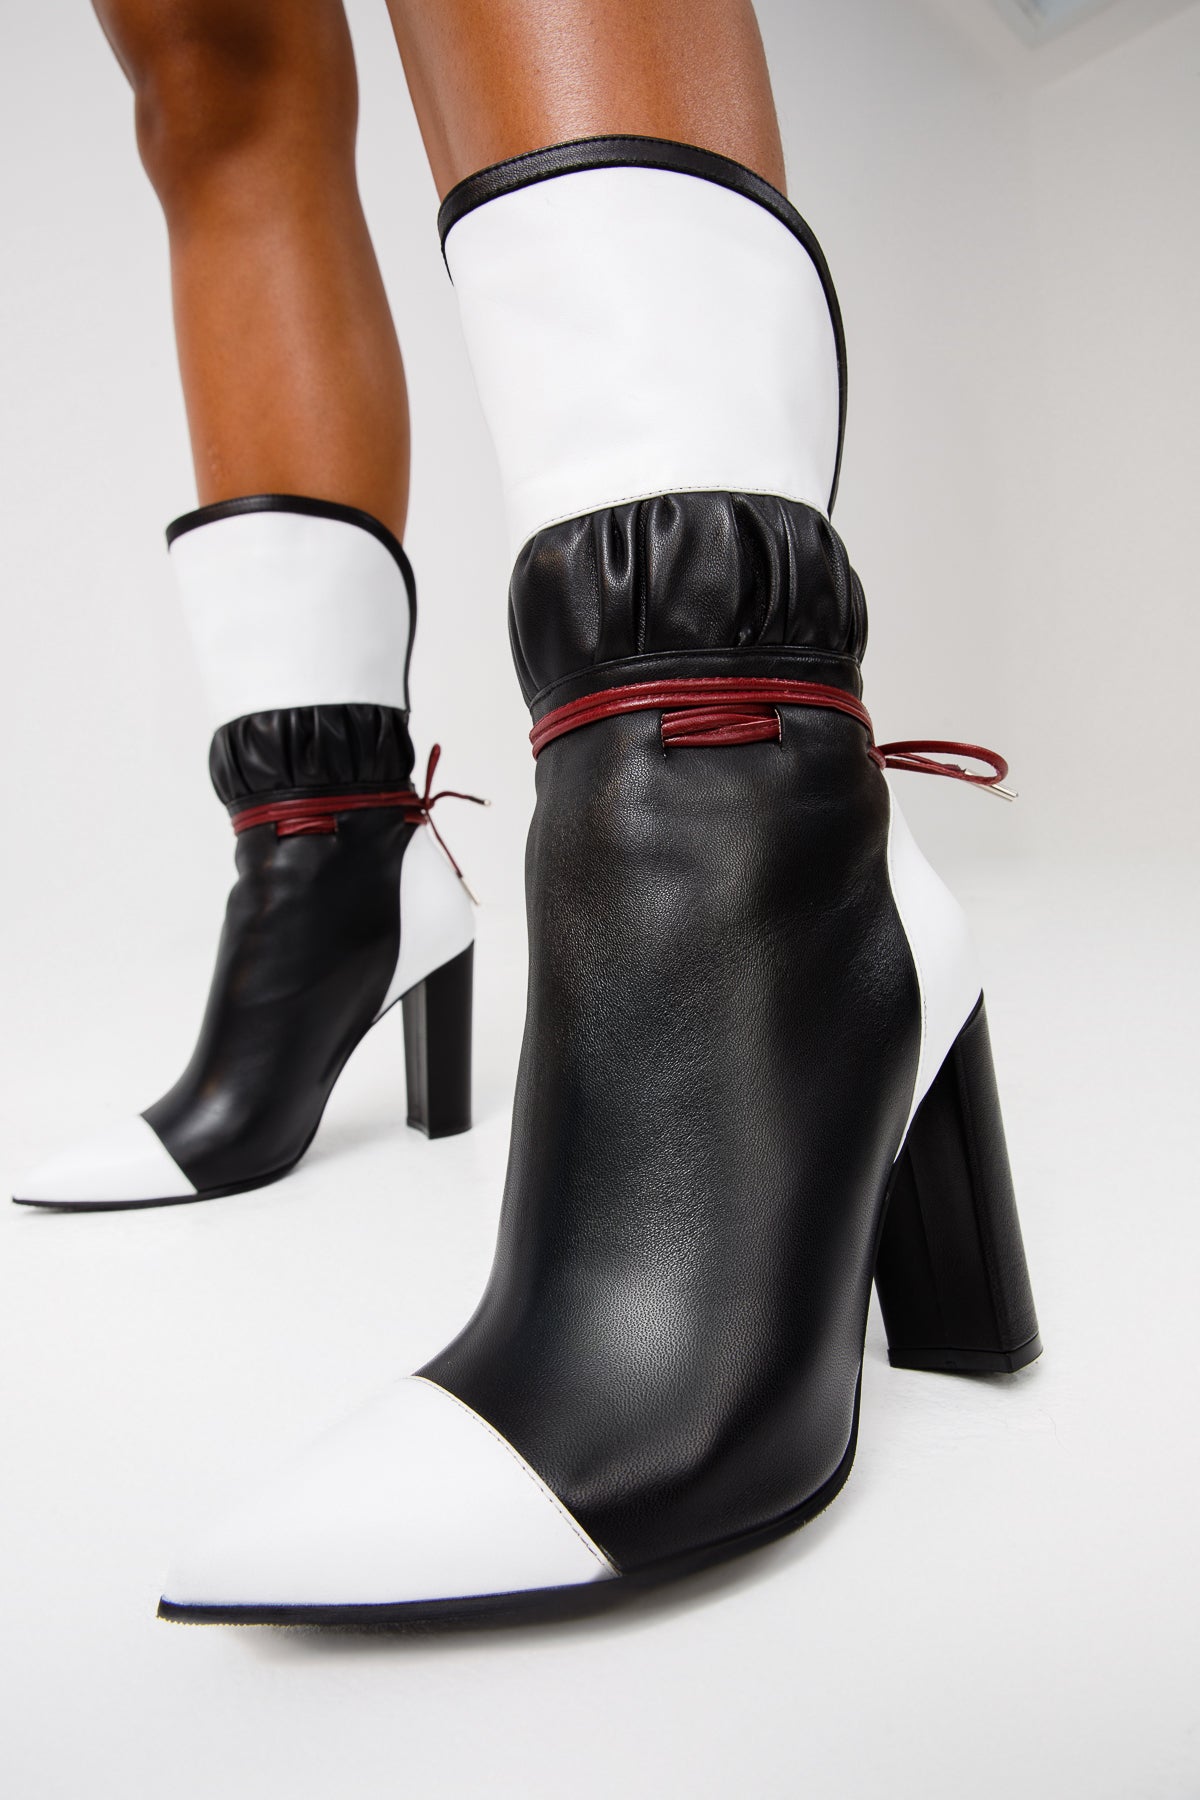 The Lucca Black & White Leather Mid Calf High Heel Women Boot Limited Edition